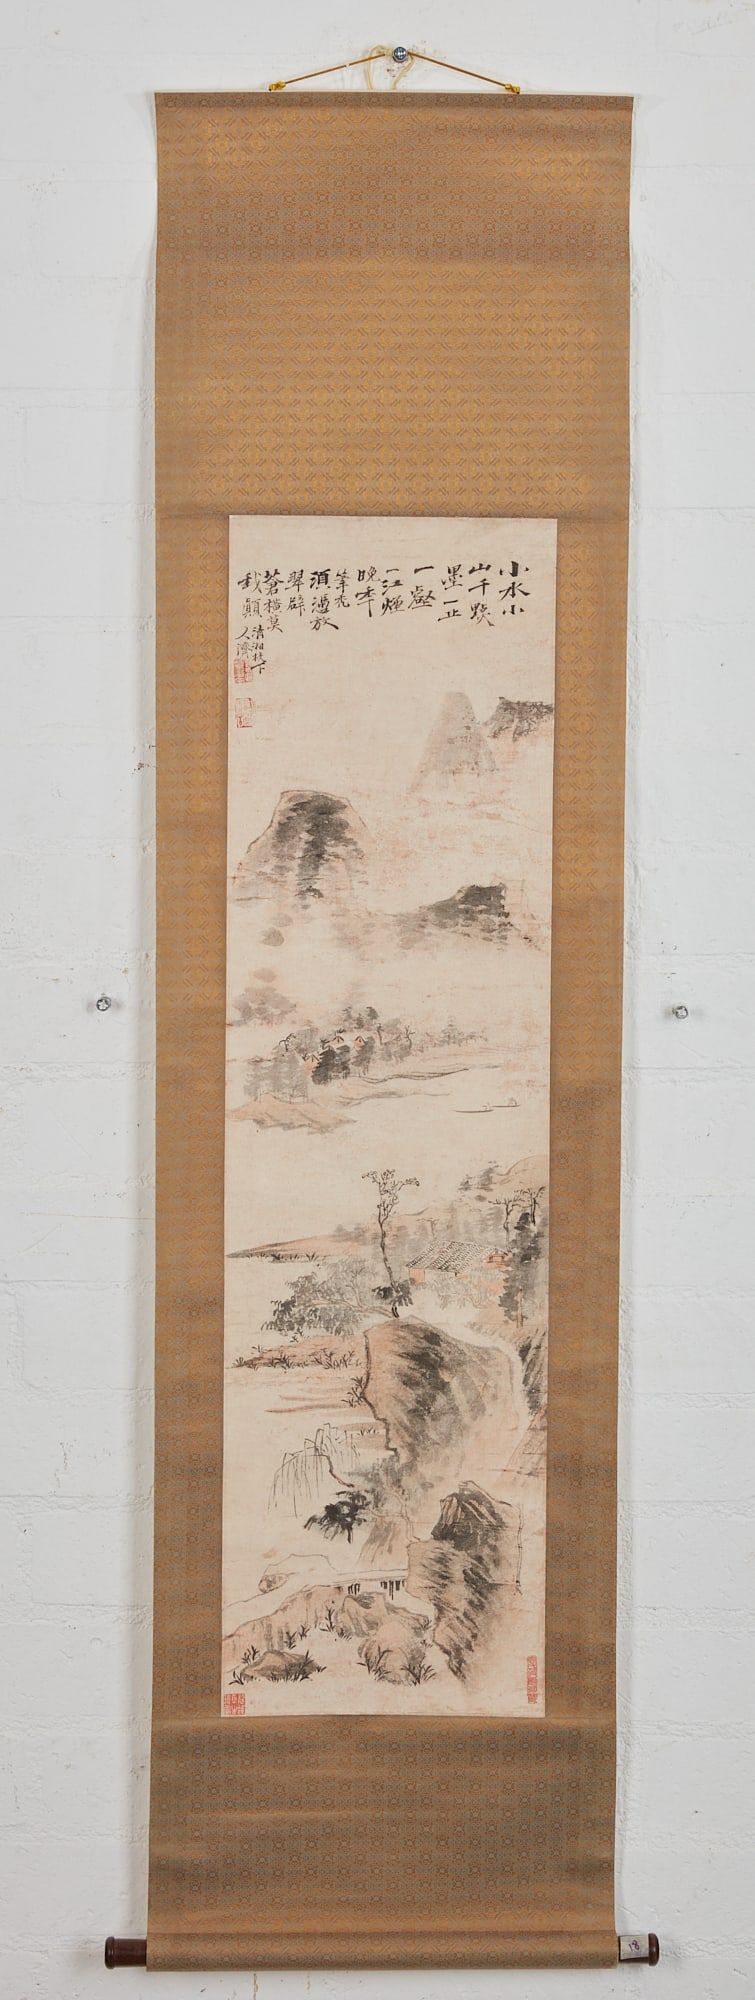 A LANDSCAPE PAINTING HANGING SCROLLA